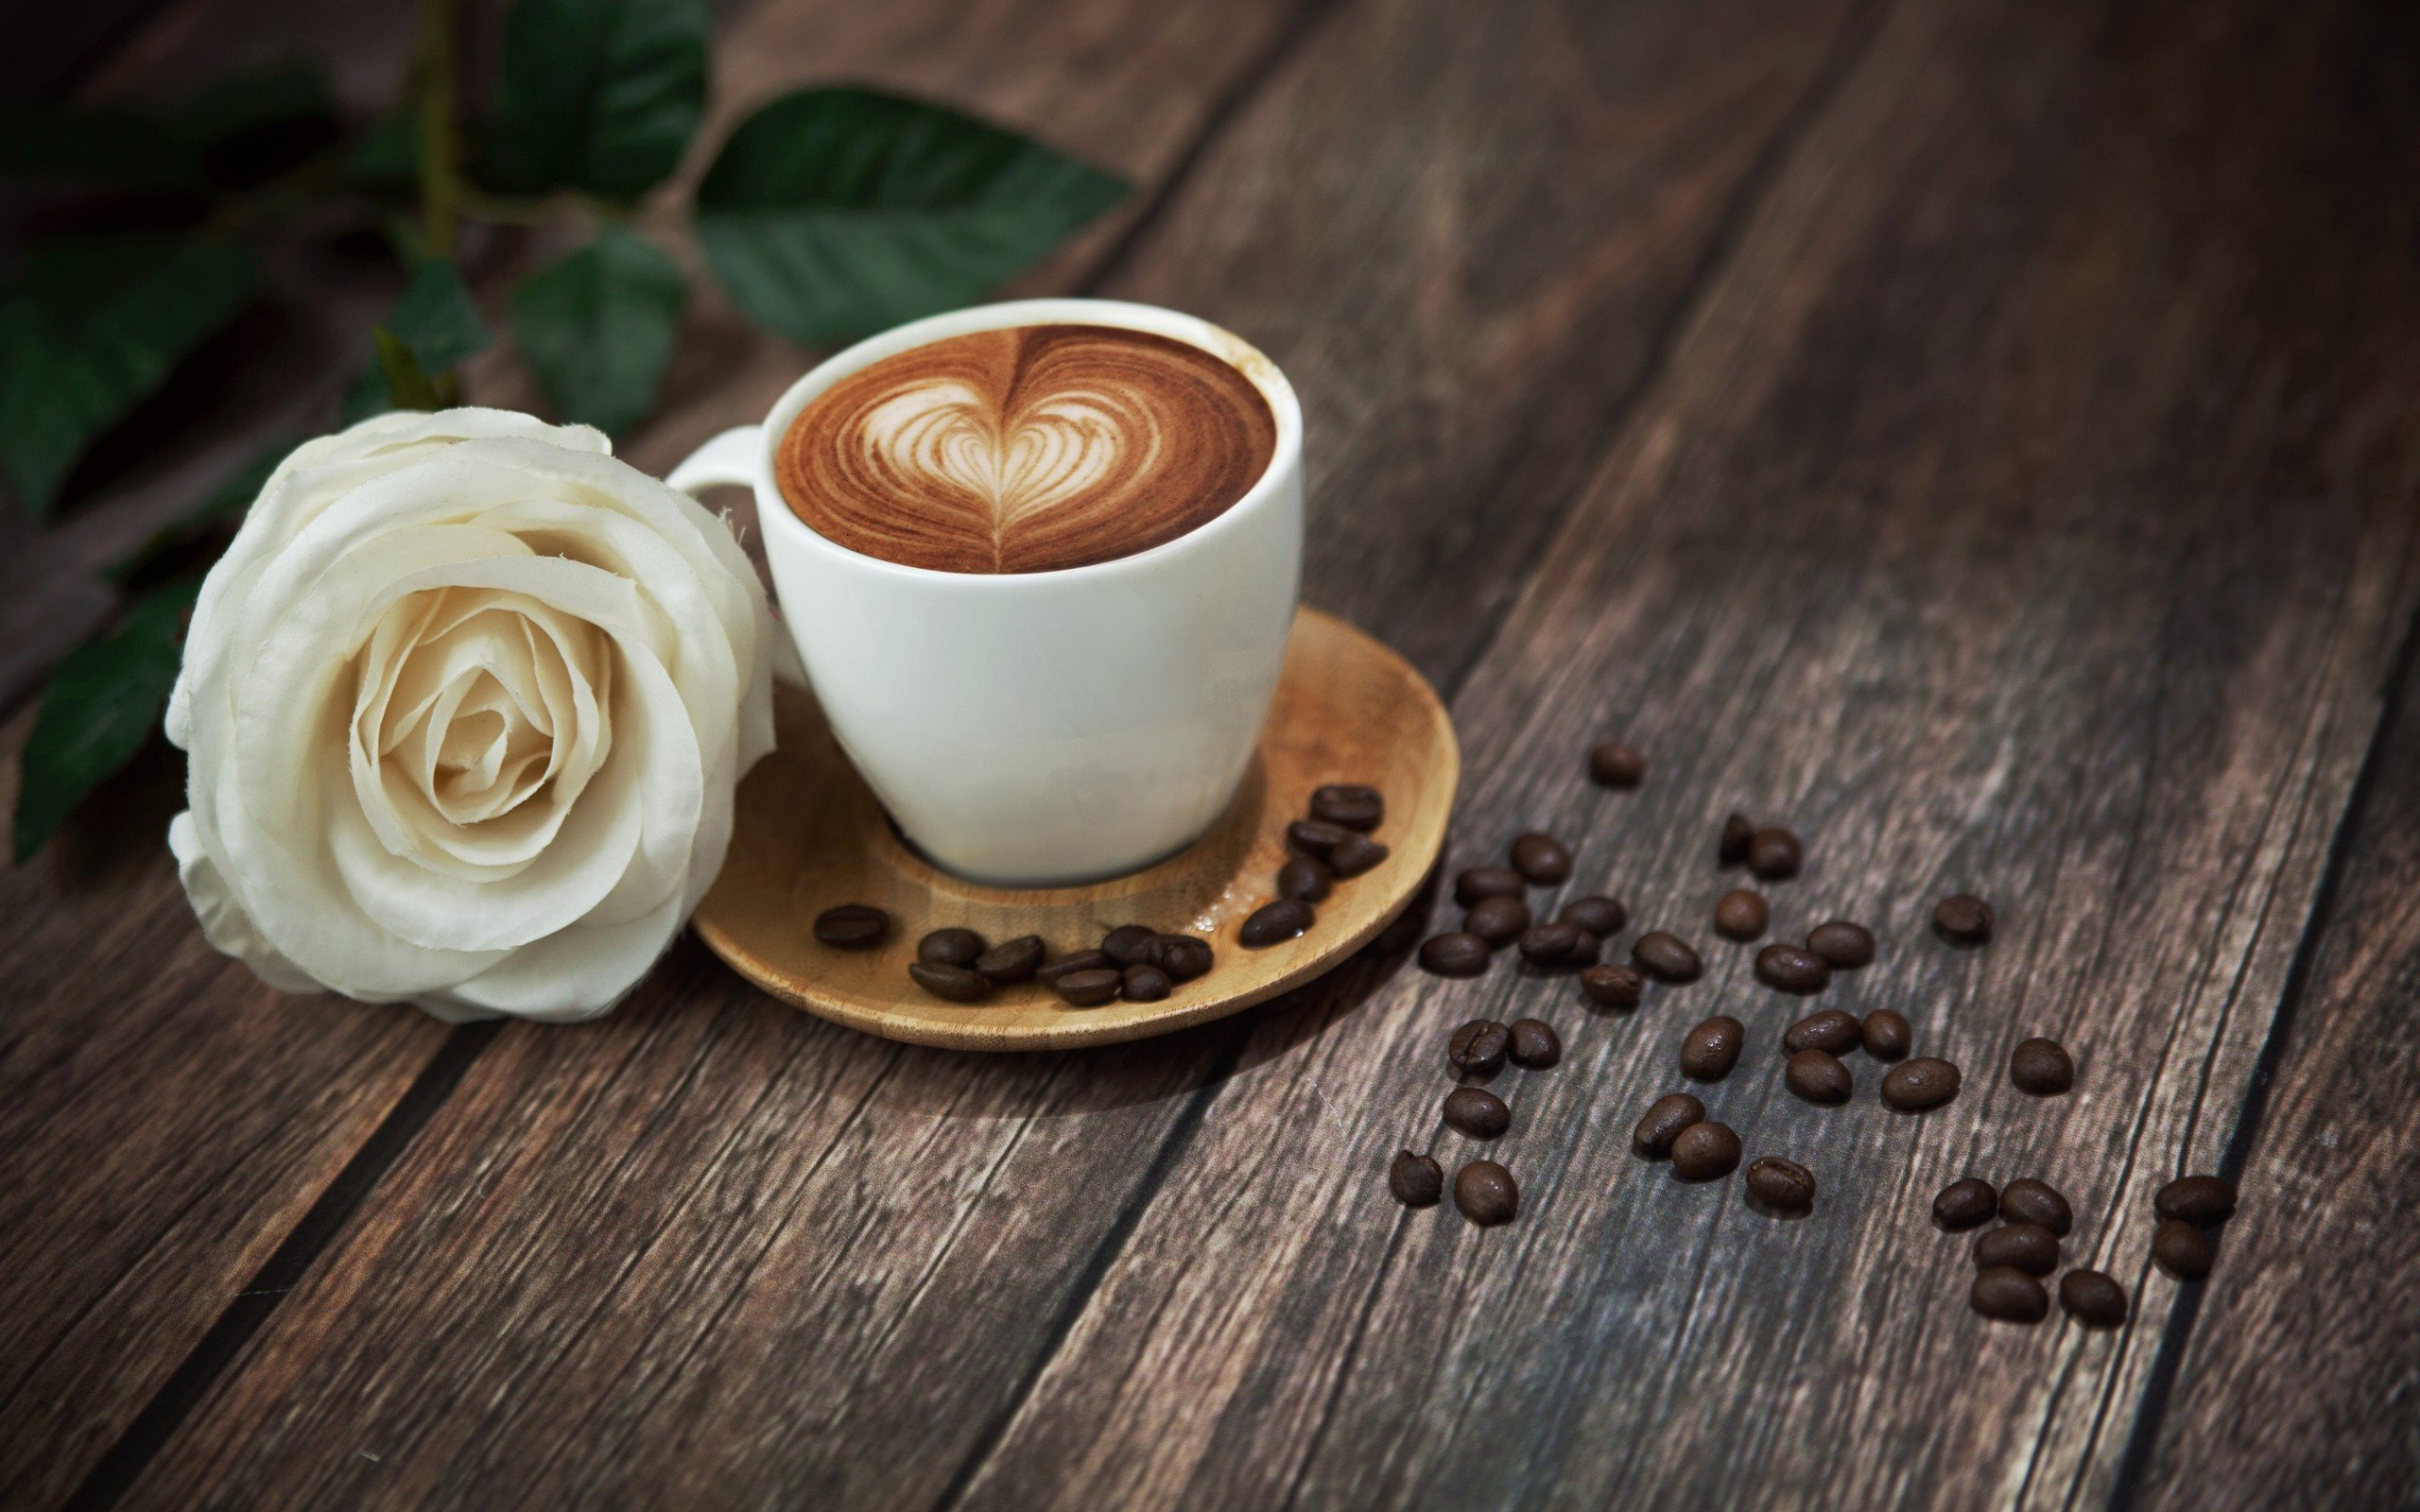 Download wallpaper rose, latte art, a cup of coffee for desktop with resolution 2560x1600. High Quality HD picture wallpaper